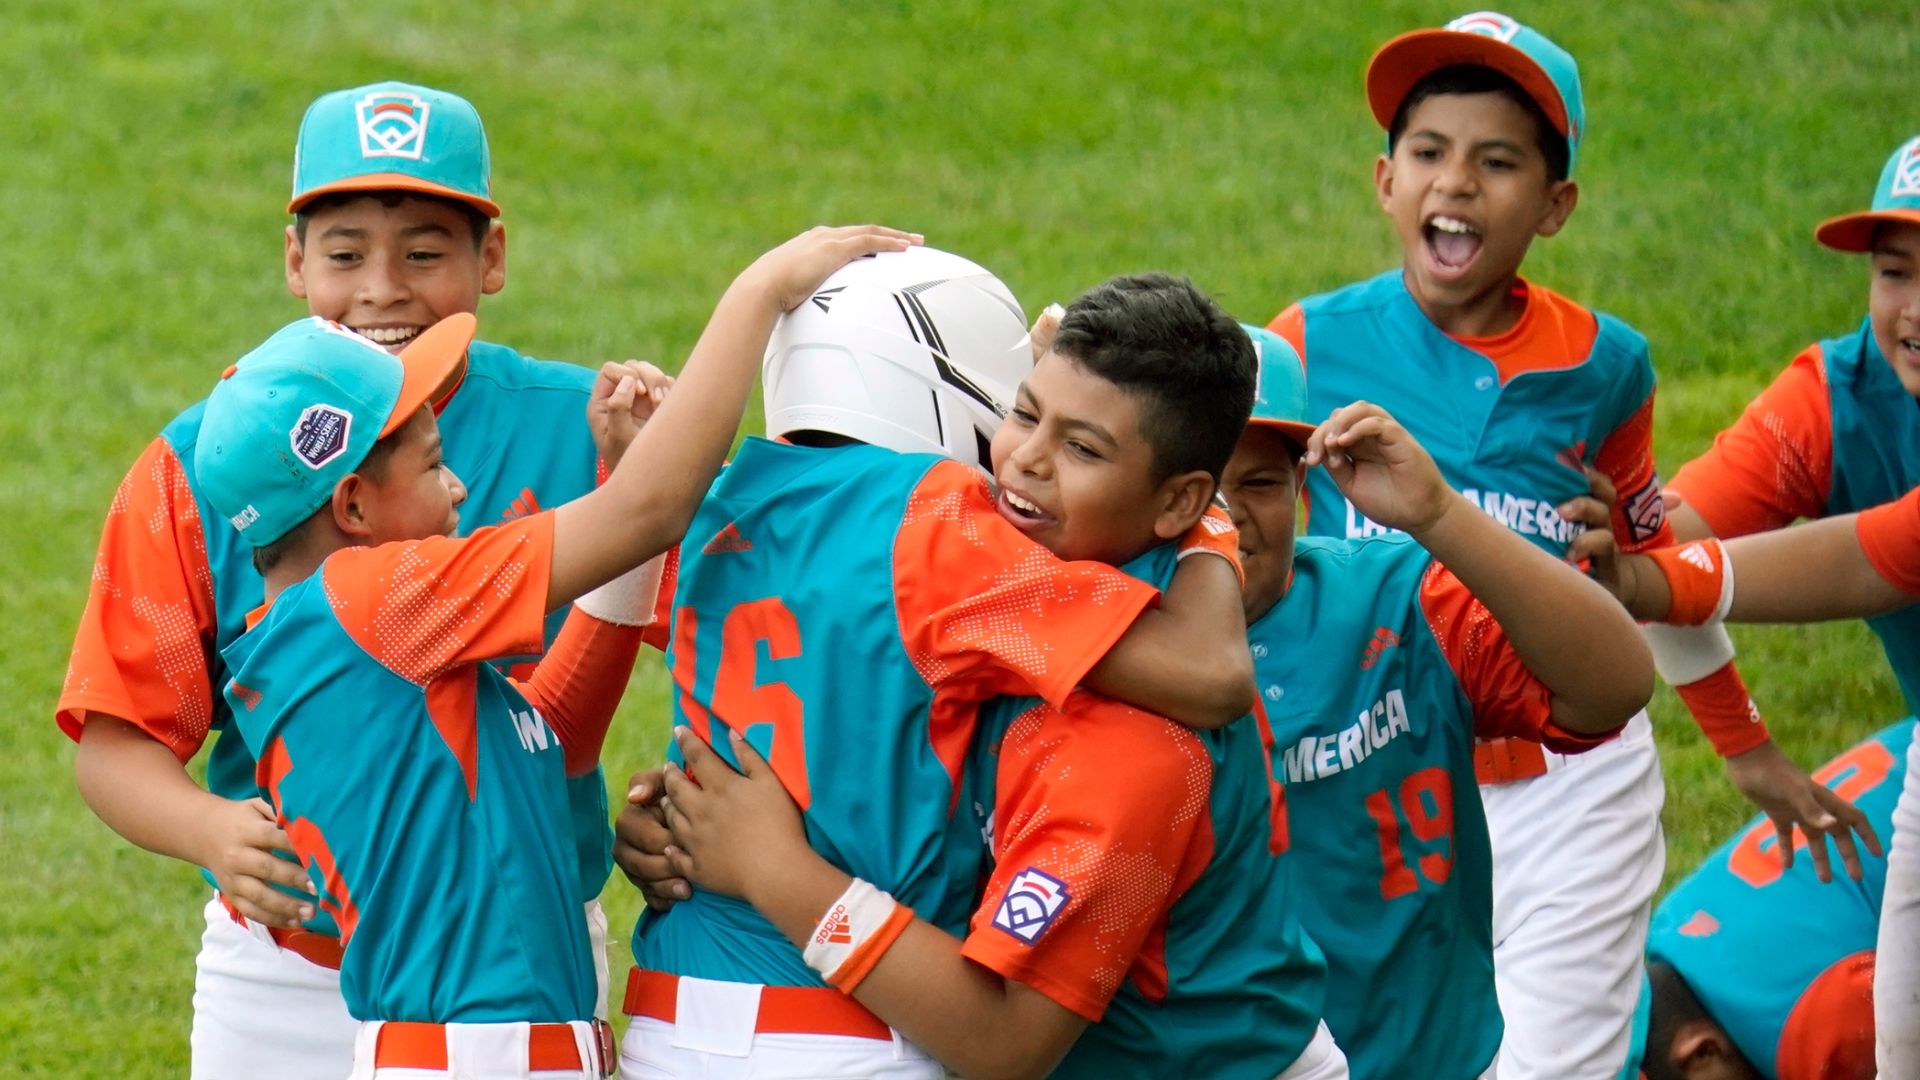 The best of Day 6 at the Little League World Series ESPN Video